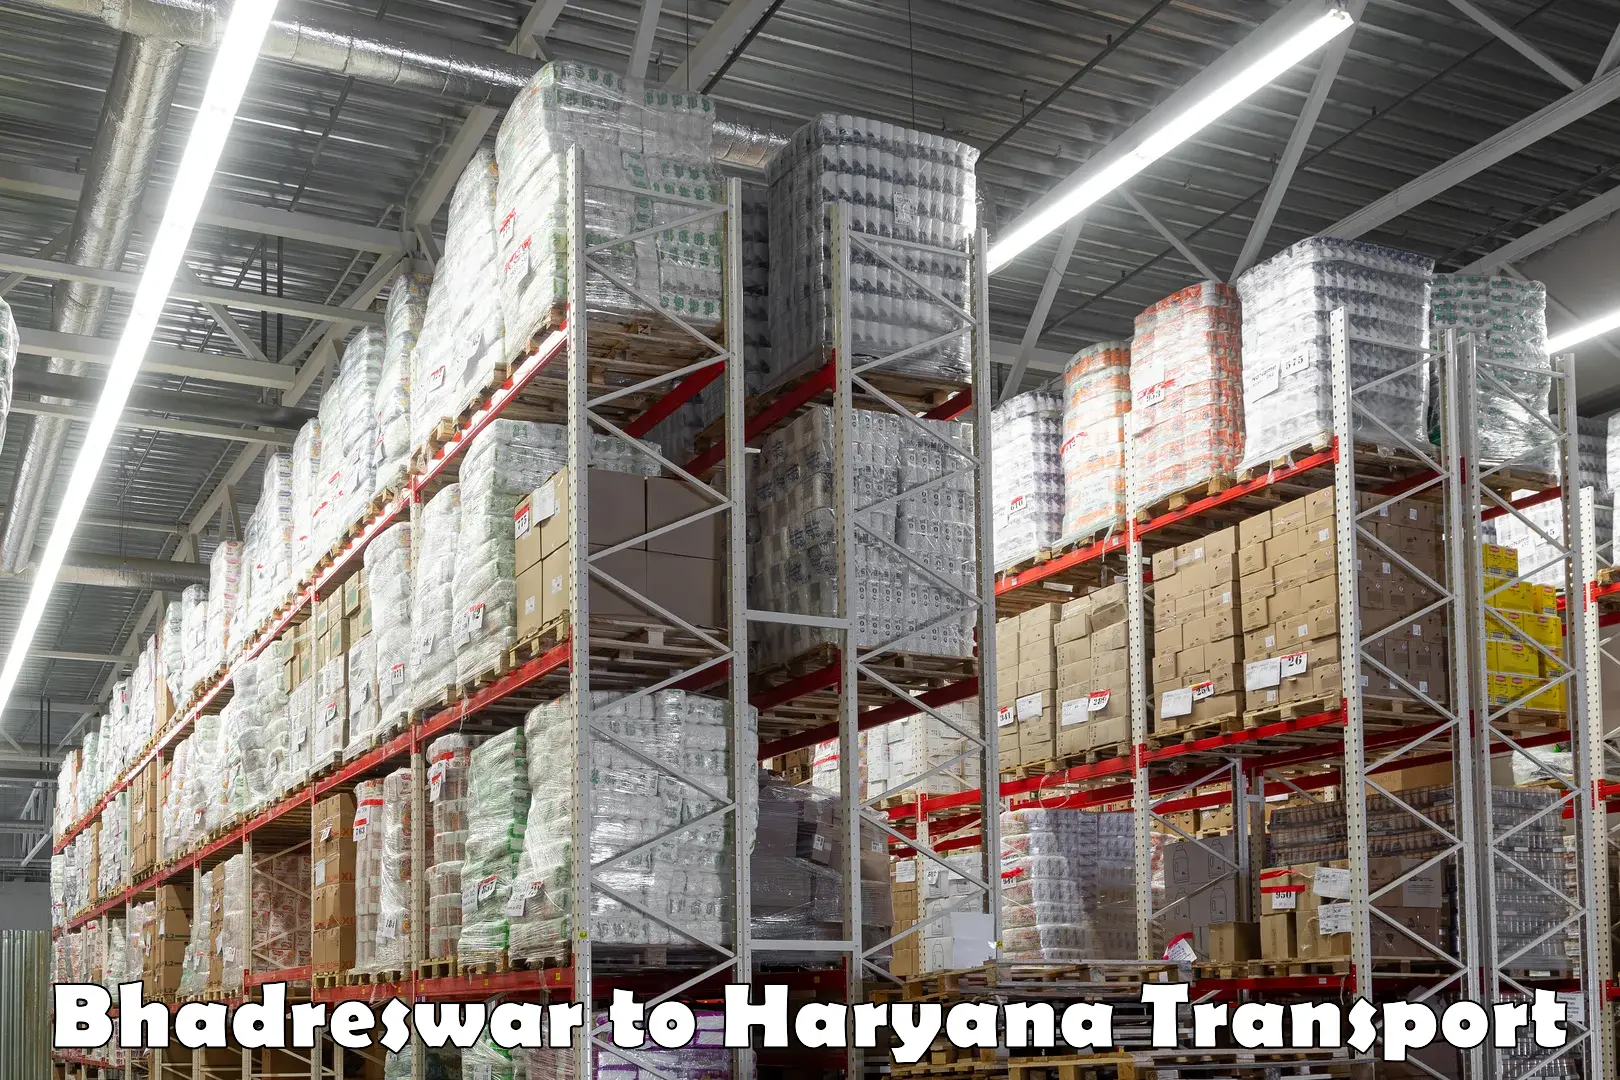 Shipping partner Bhadreswar to Pinjore